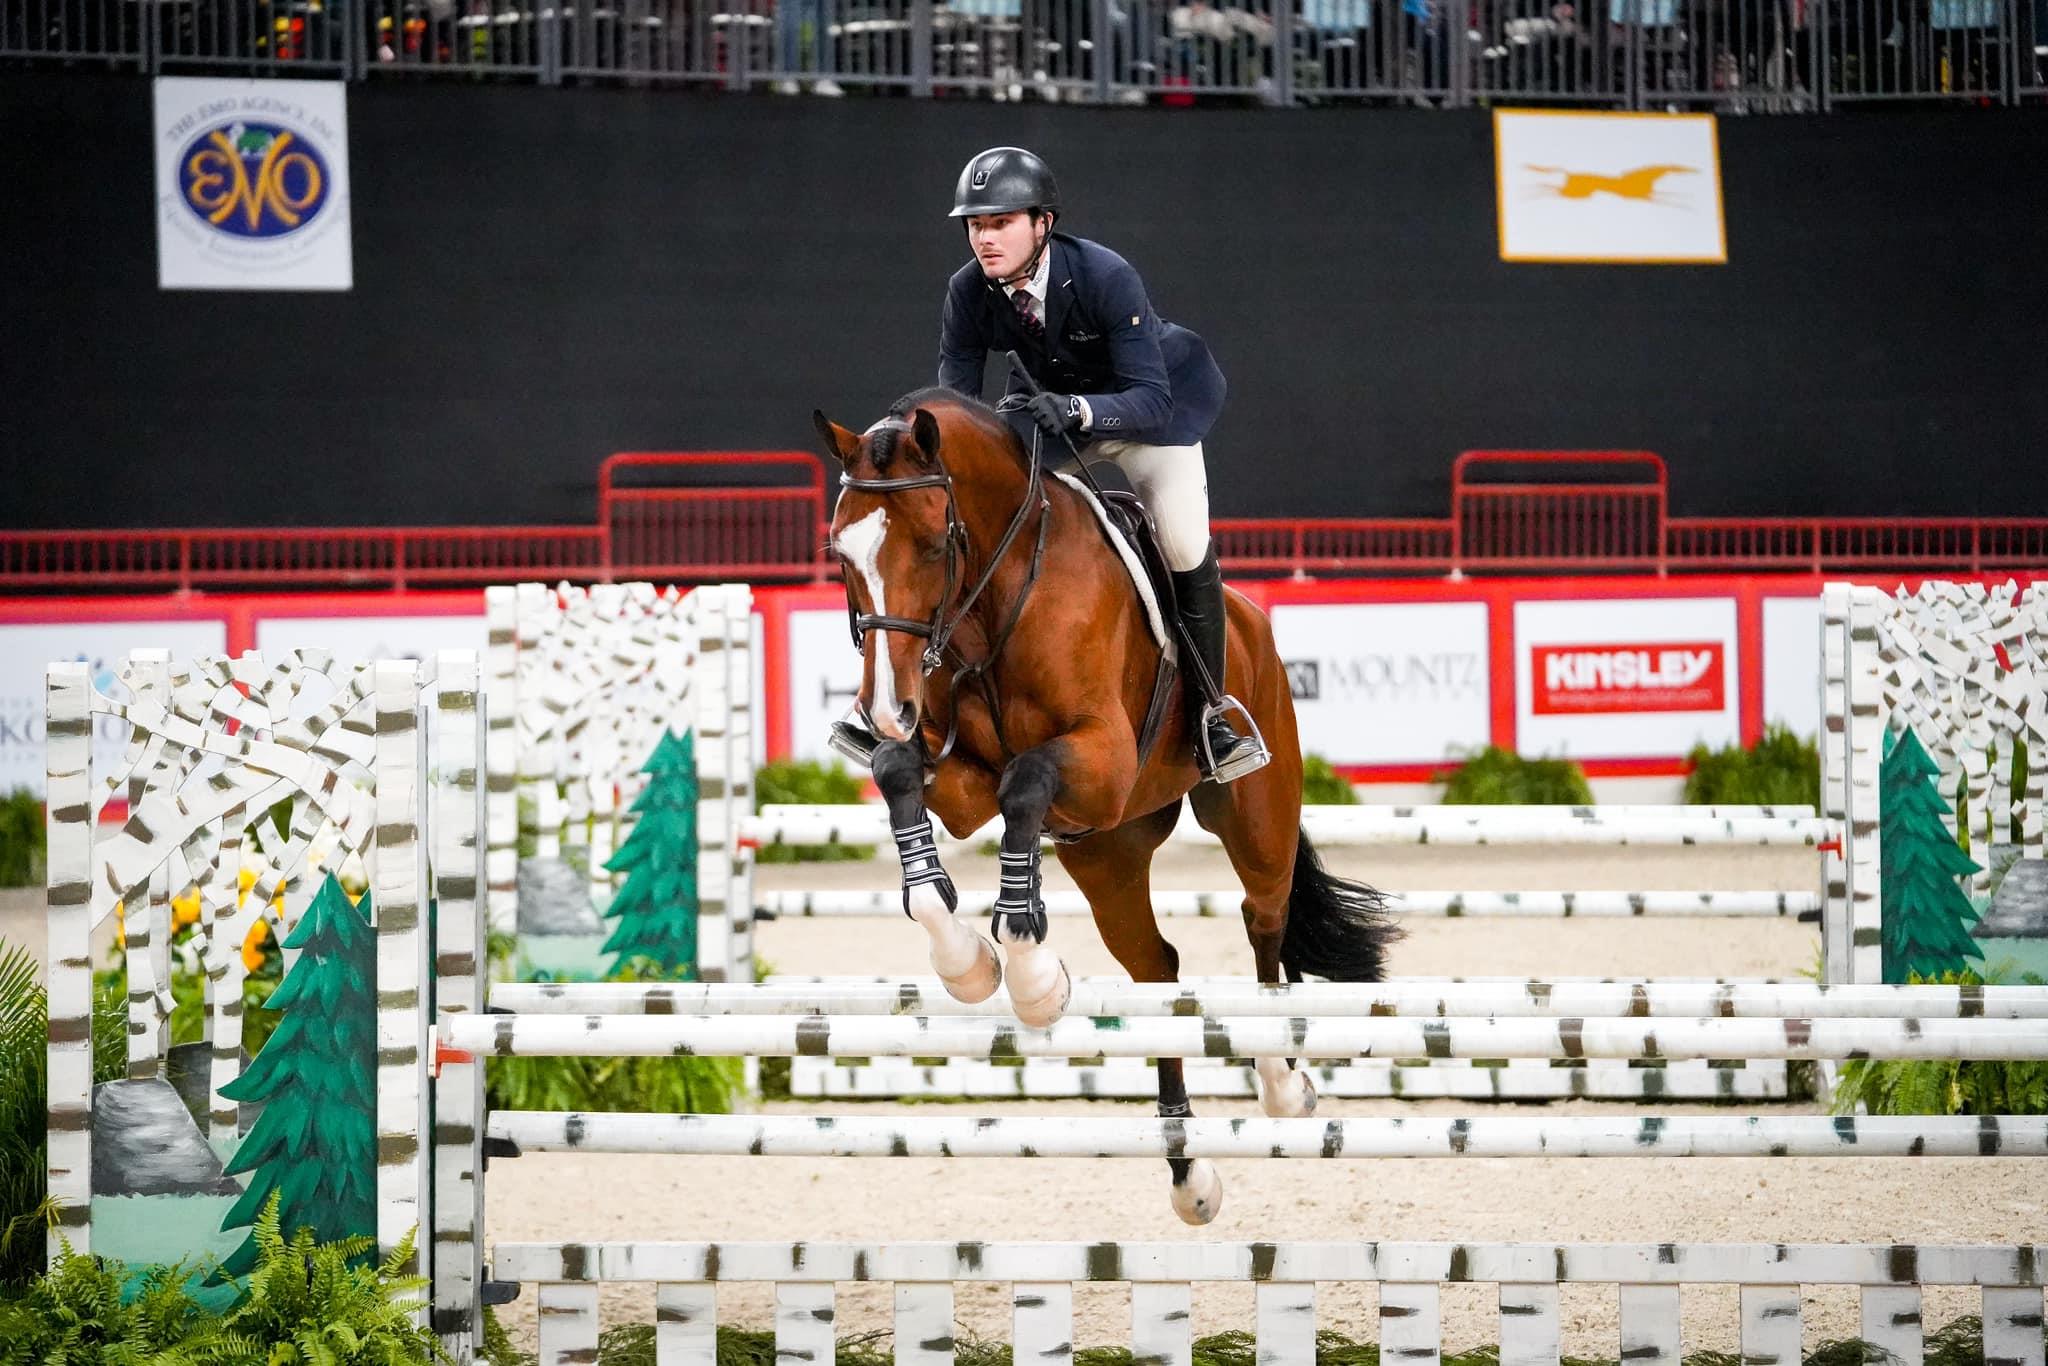 Photo showcasing the Dover Saddlery/USEF Hunter Seat Medal Final